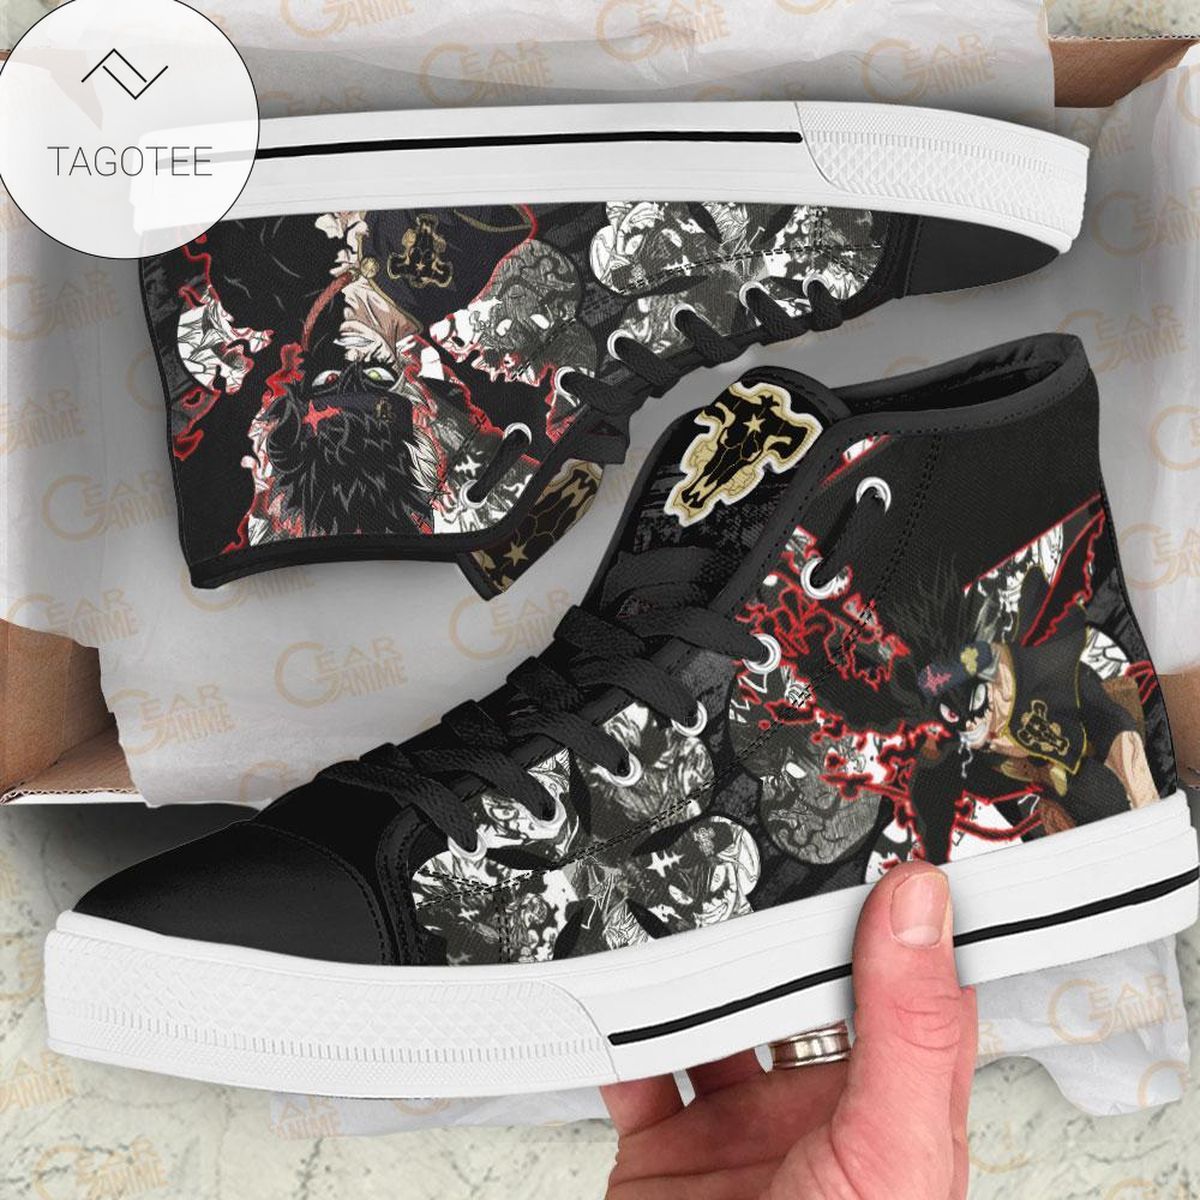 Devil Asta Manga Anime Lovers Black Clover Sneakers High Top Shoes